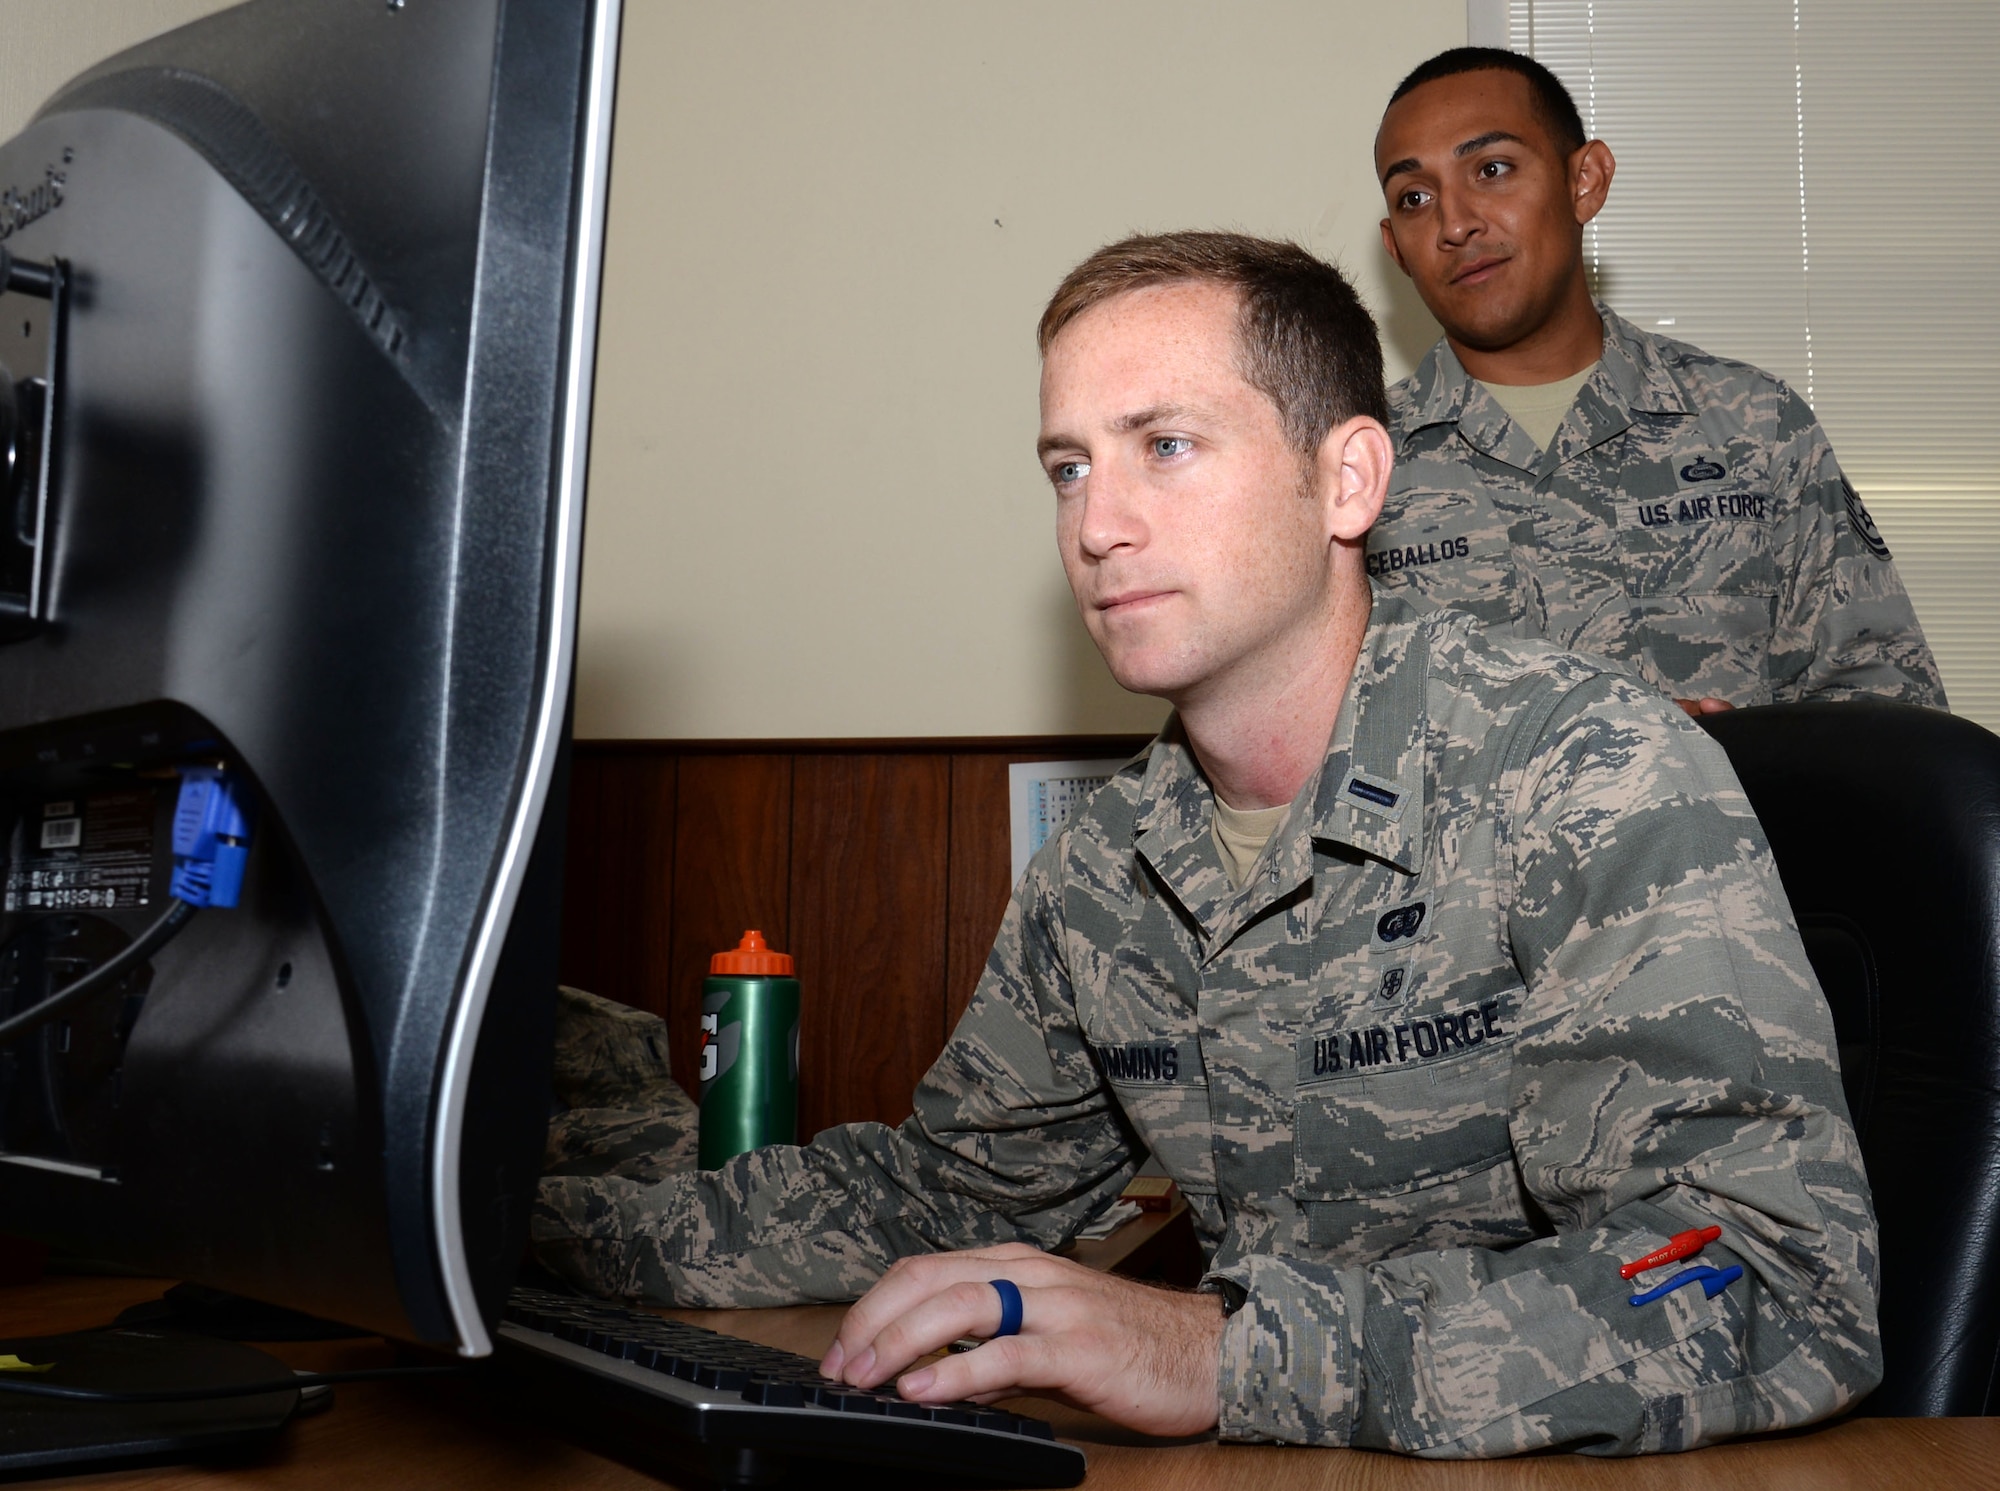 U.S. Air Force 1st Lt. Micah Cummins, left, 100th Air Refueling Wing chief of protocol and U.S. Air Force Tech. Sgt. Ricky Ceballos, 100th Air Refueling Wing NCO in charge of protocol, check the itinerary for an upcoming distinguished visitor tour Aug. 3, 2016, on RAF Mildenhall, England. Cummins has a stressful role in the military and enjoys soccer in his spare time as a way to keep fit and relax. (U.S. Air Force photo by Gina Randall)